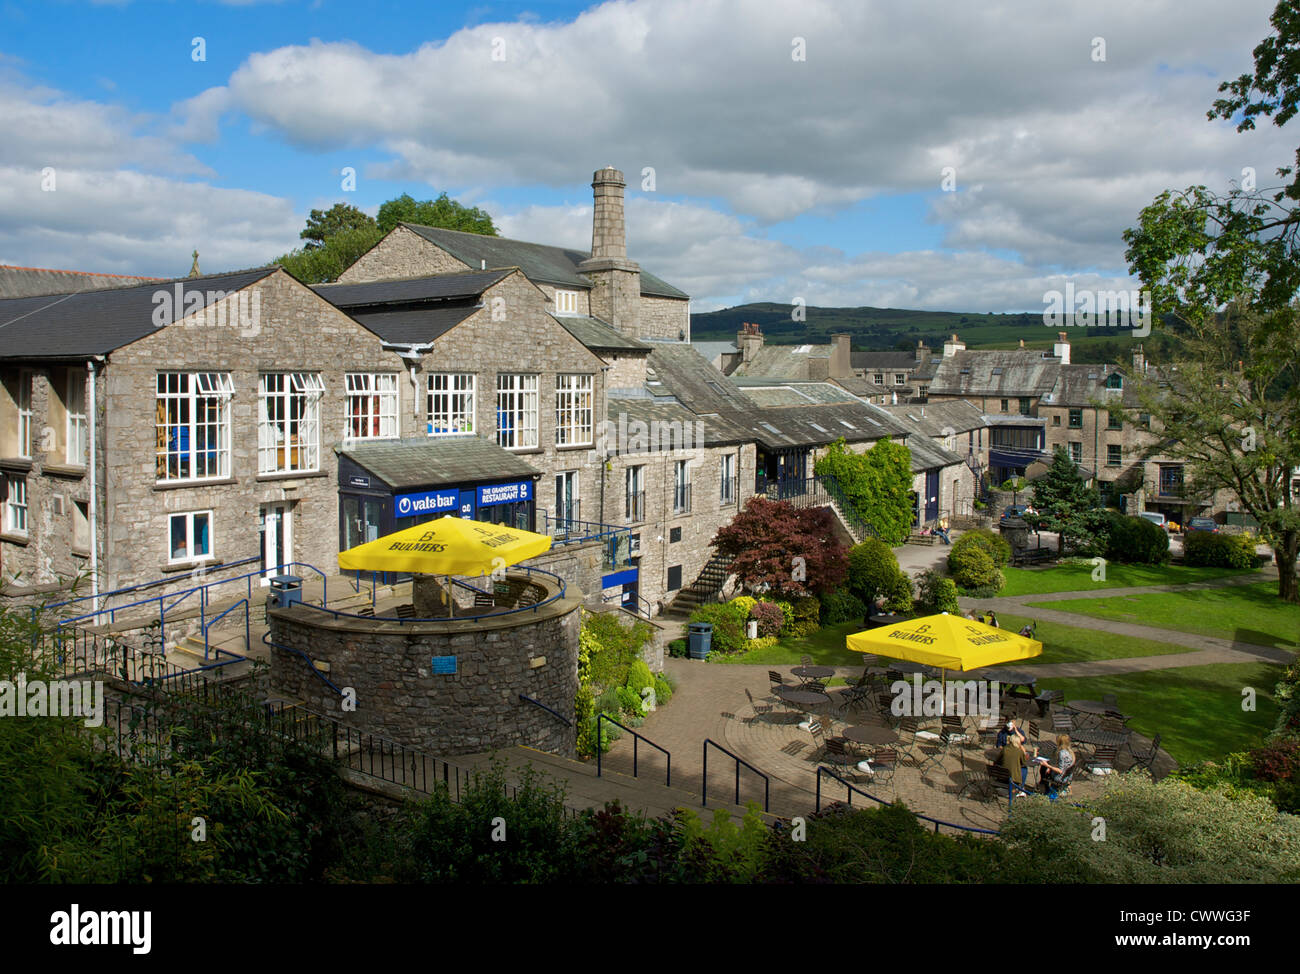 People sitting outside the Old Brewery Arts Centre, Kendal, Cumbria, England UK Stock Photo